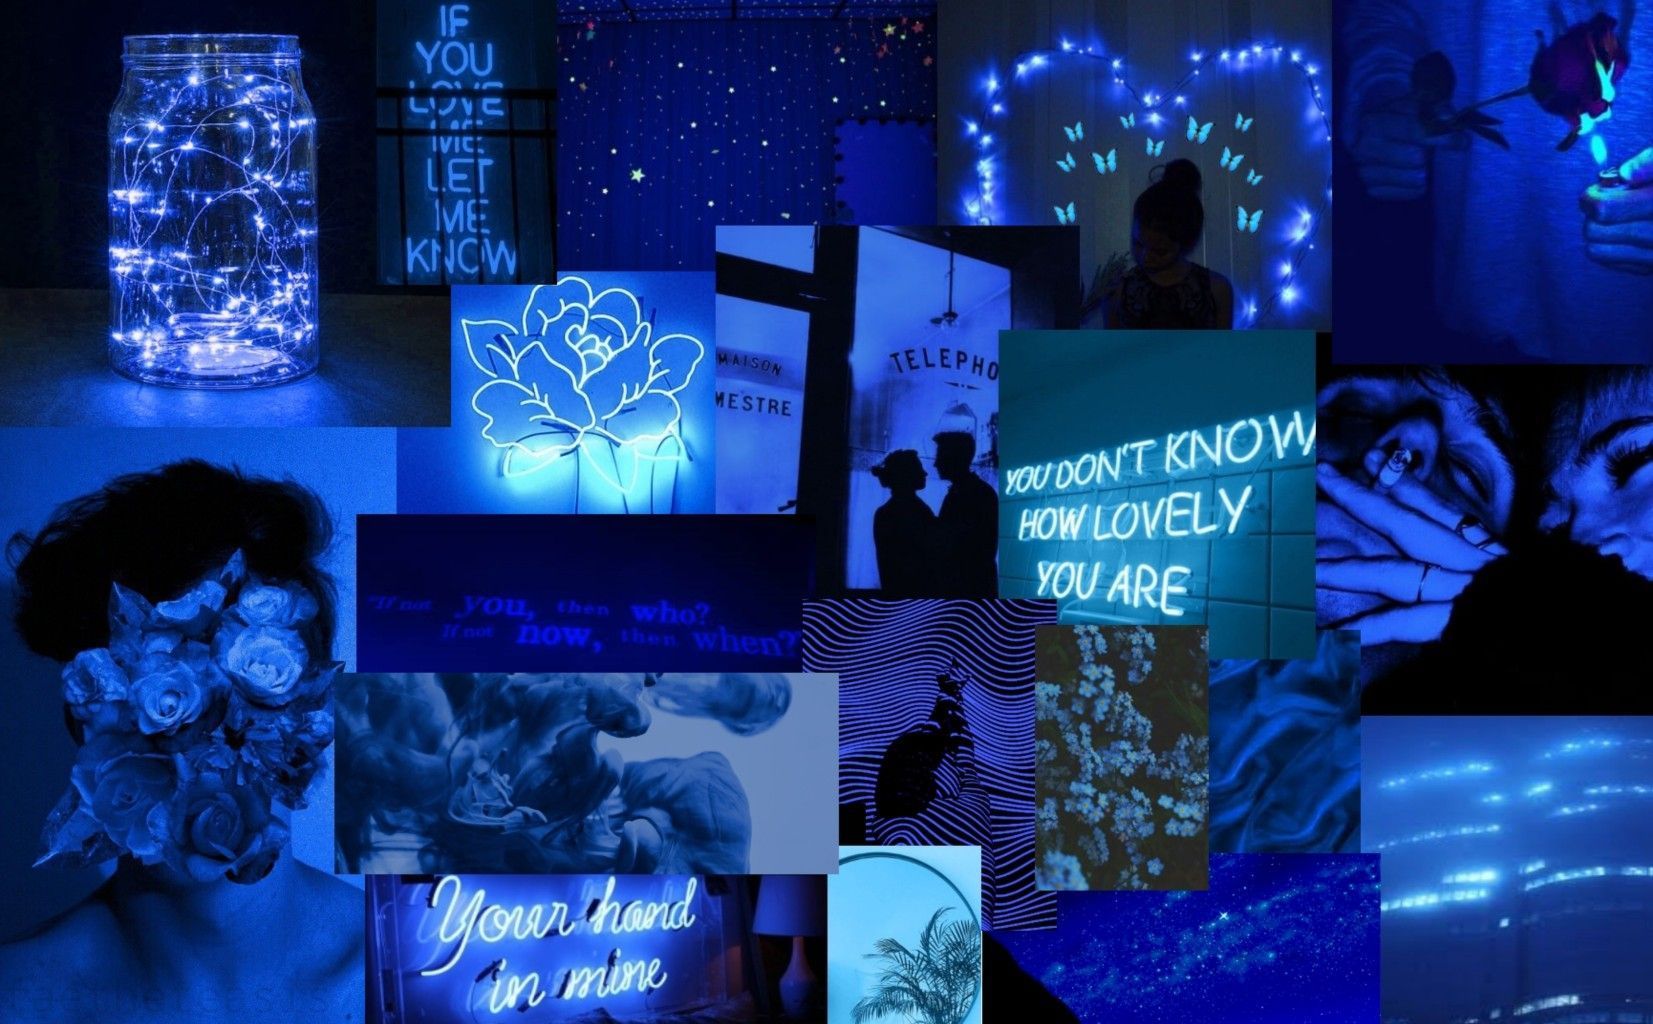 A collage of pictures with blue lighting - Dark blue, neon blue, navy blue